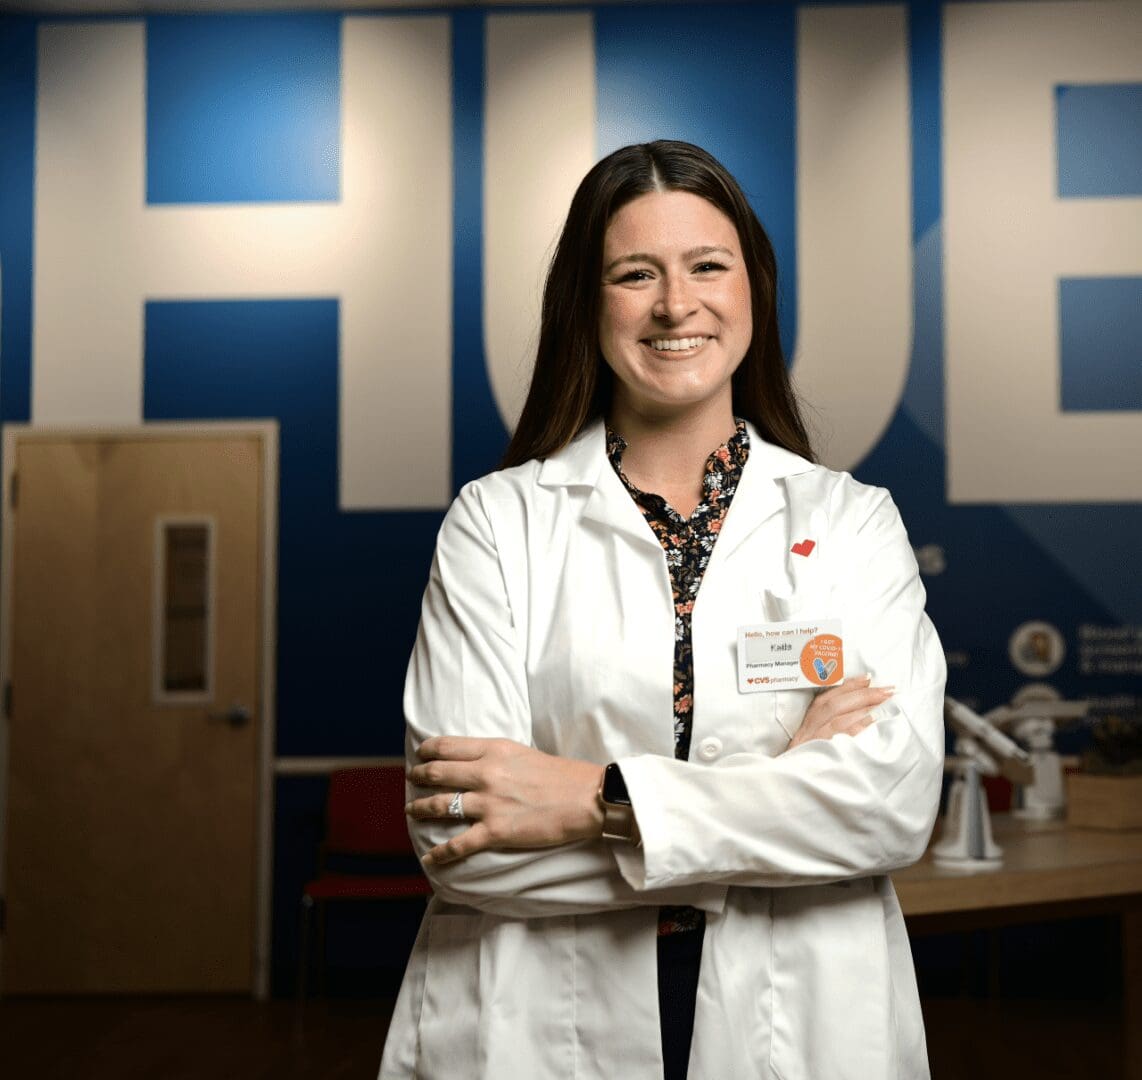 A woman in a lab coat standing in front of a blue wall.